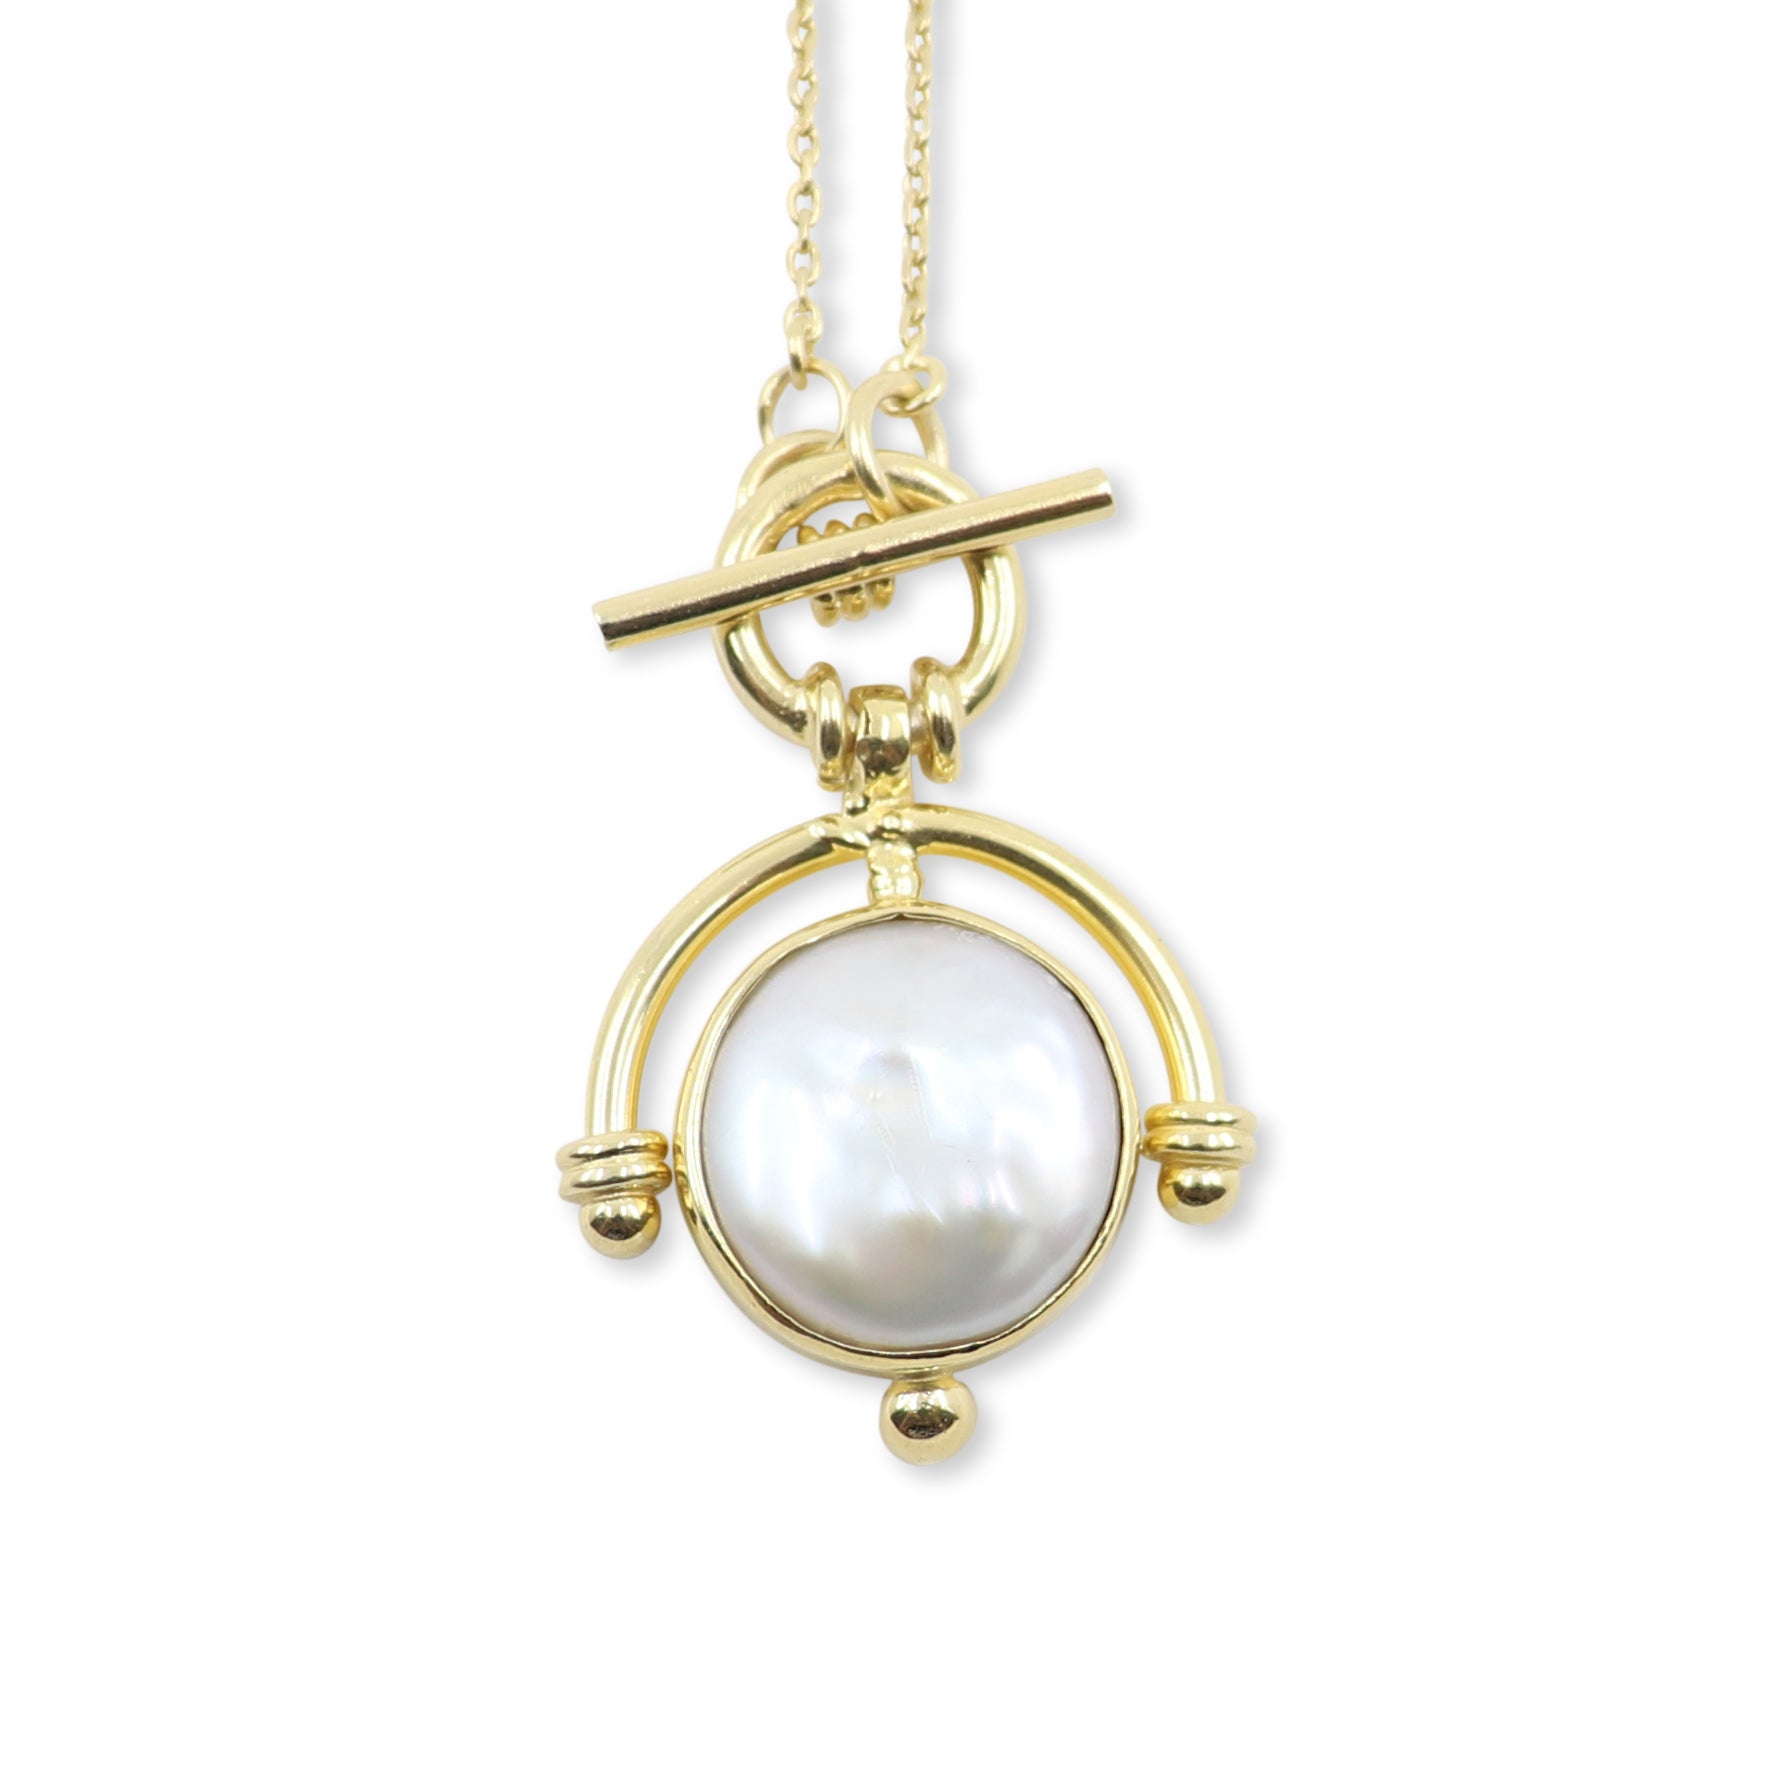 The Lost Pearl Gold Neckace